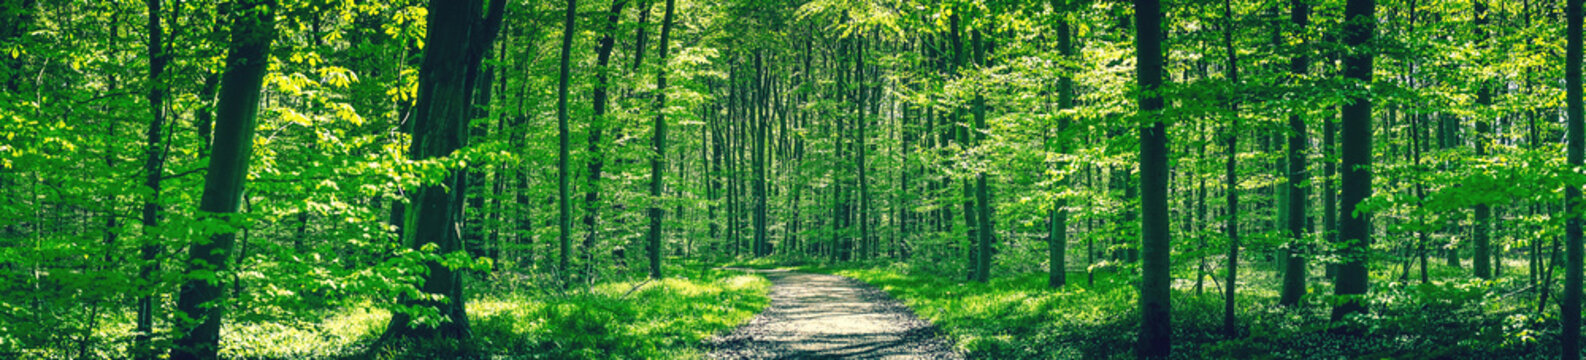 Forest trail in a green beech forest